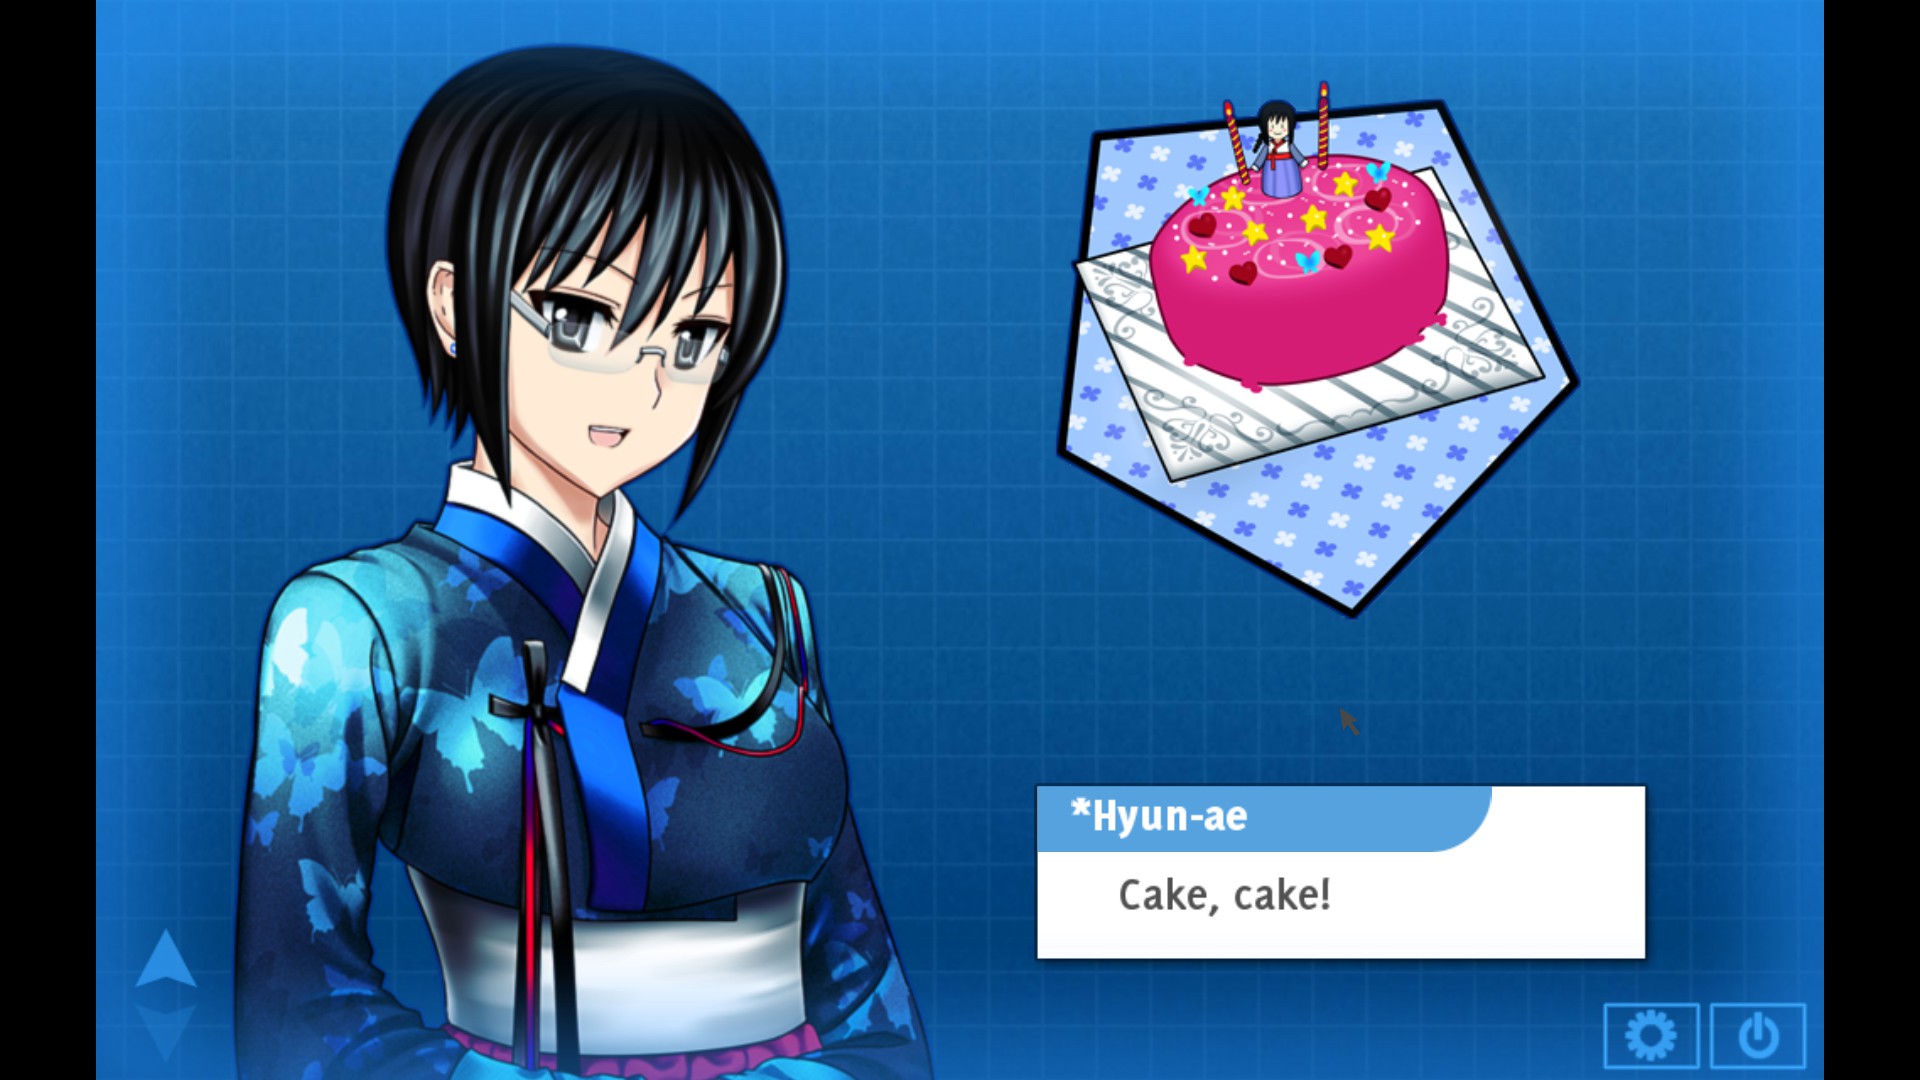 Video Game Asks Players To Bake Real Cakes For Virtual Girlfriends